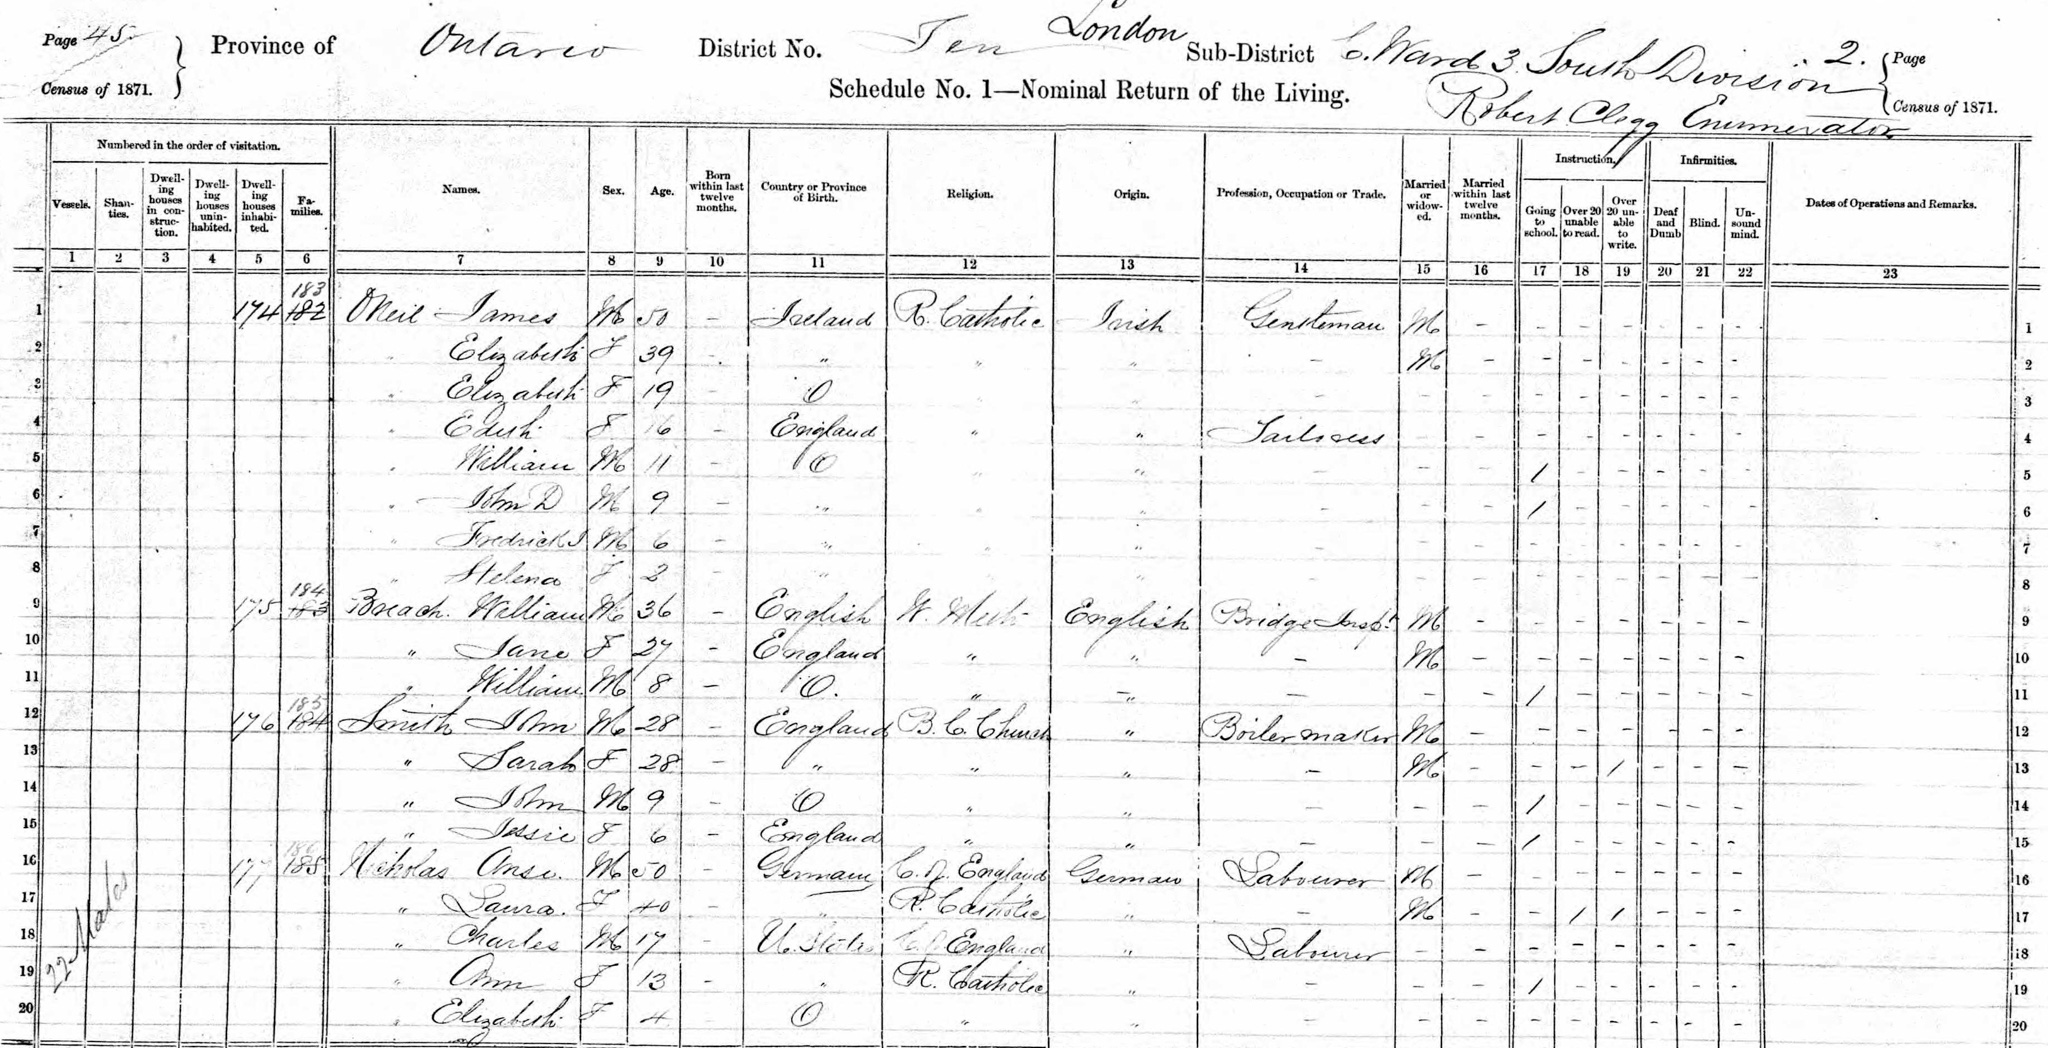 1871 Census for Anse Nicholas Family